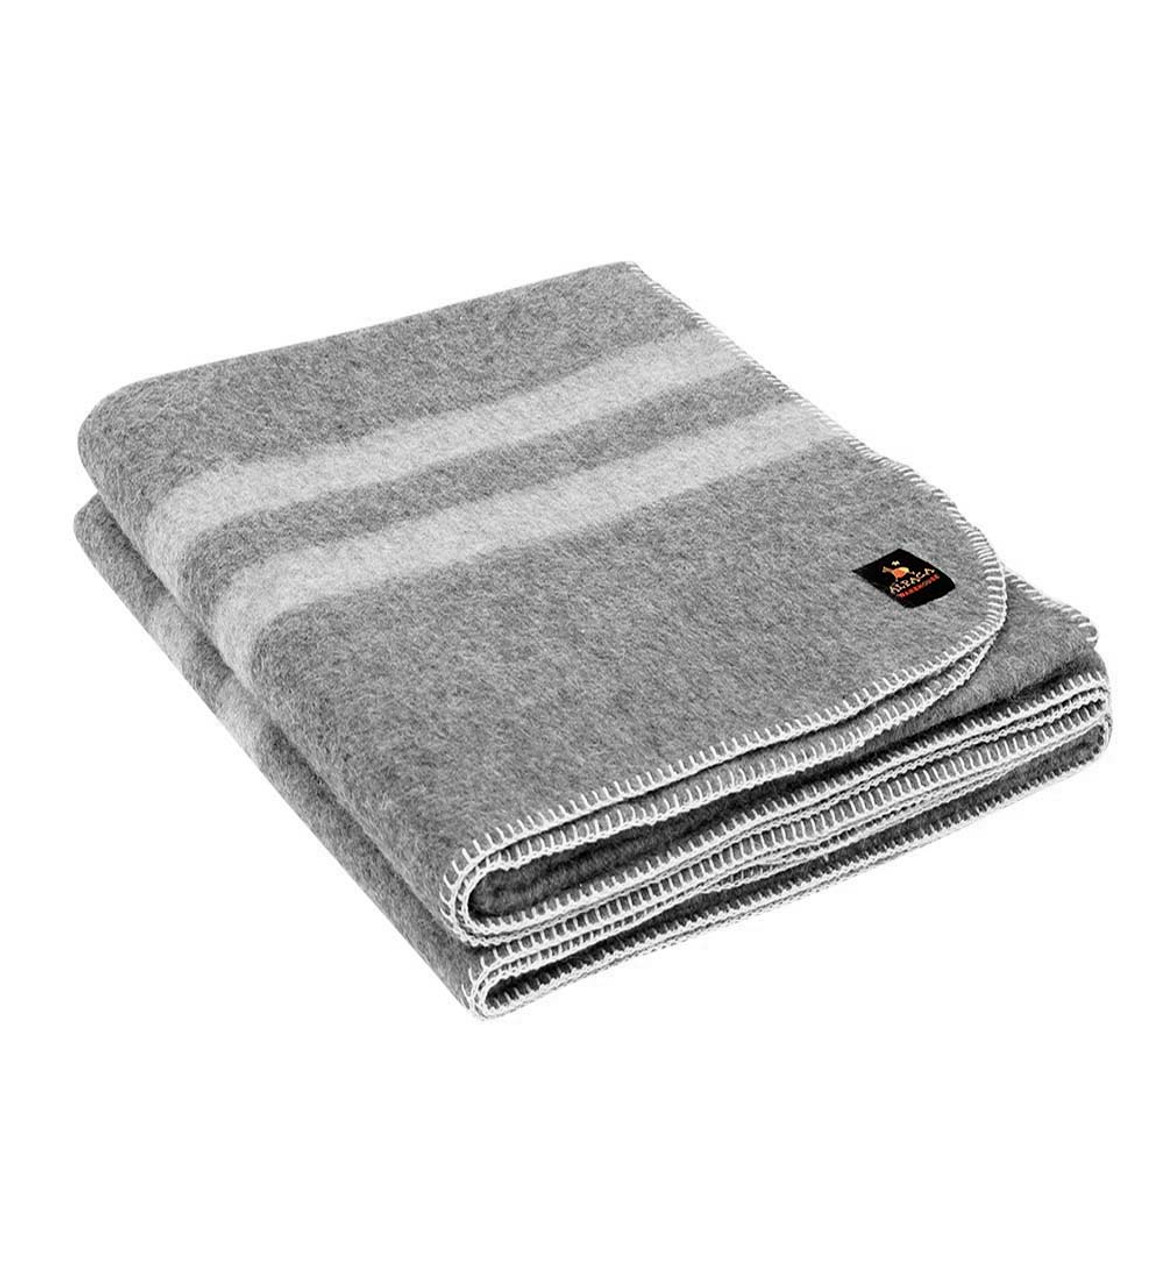 Chunky Pure Wool Blanket – Grey Military-Style Thick Blanket